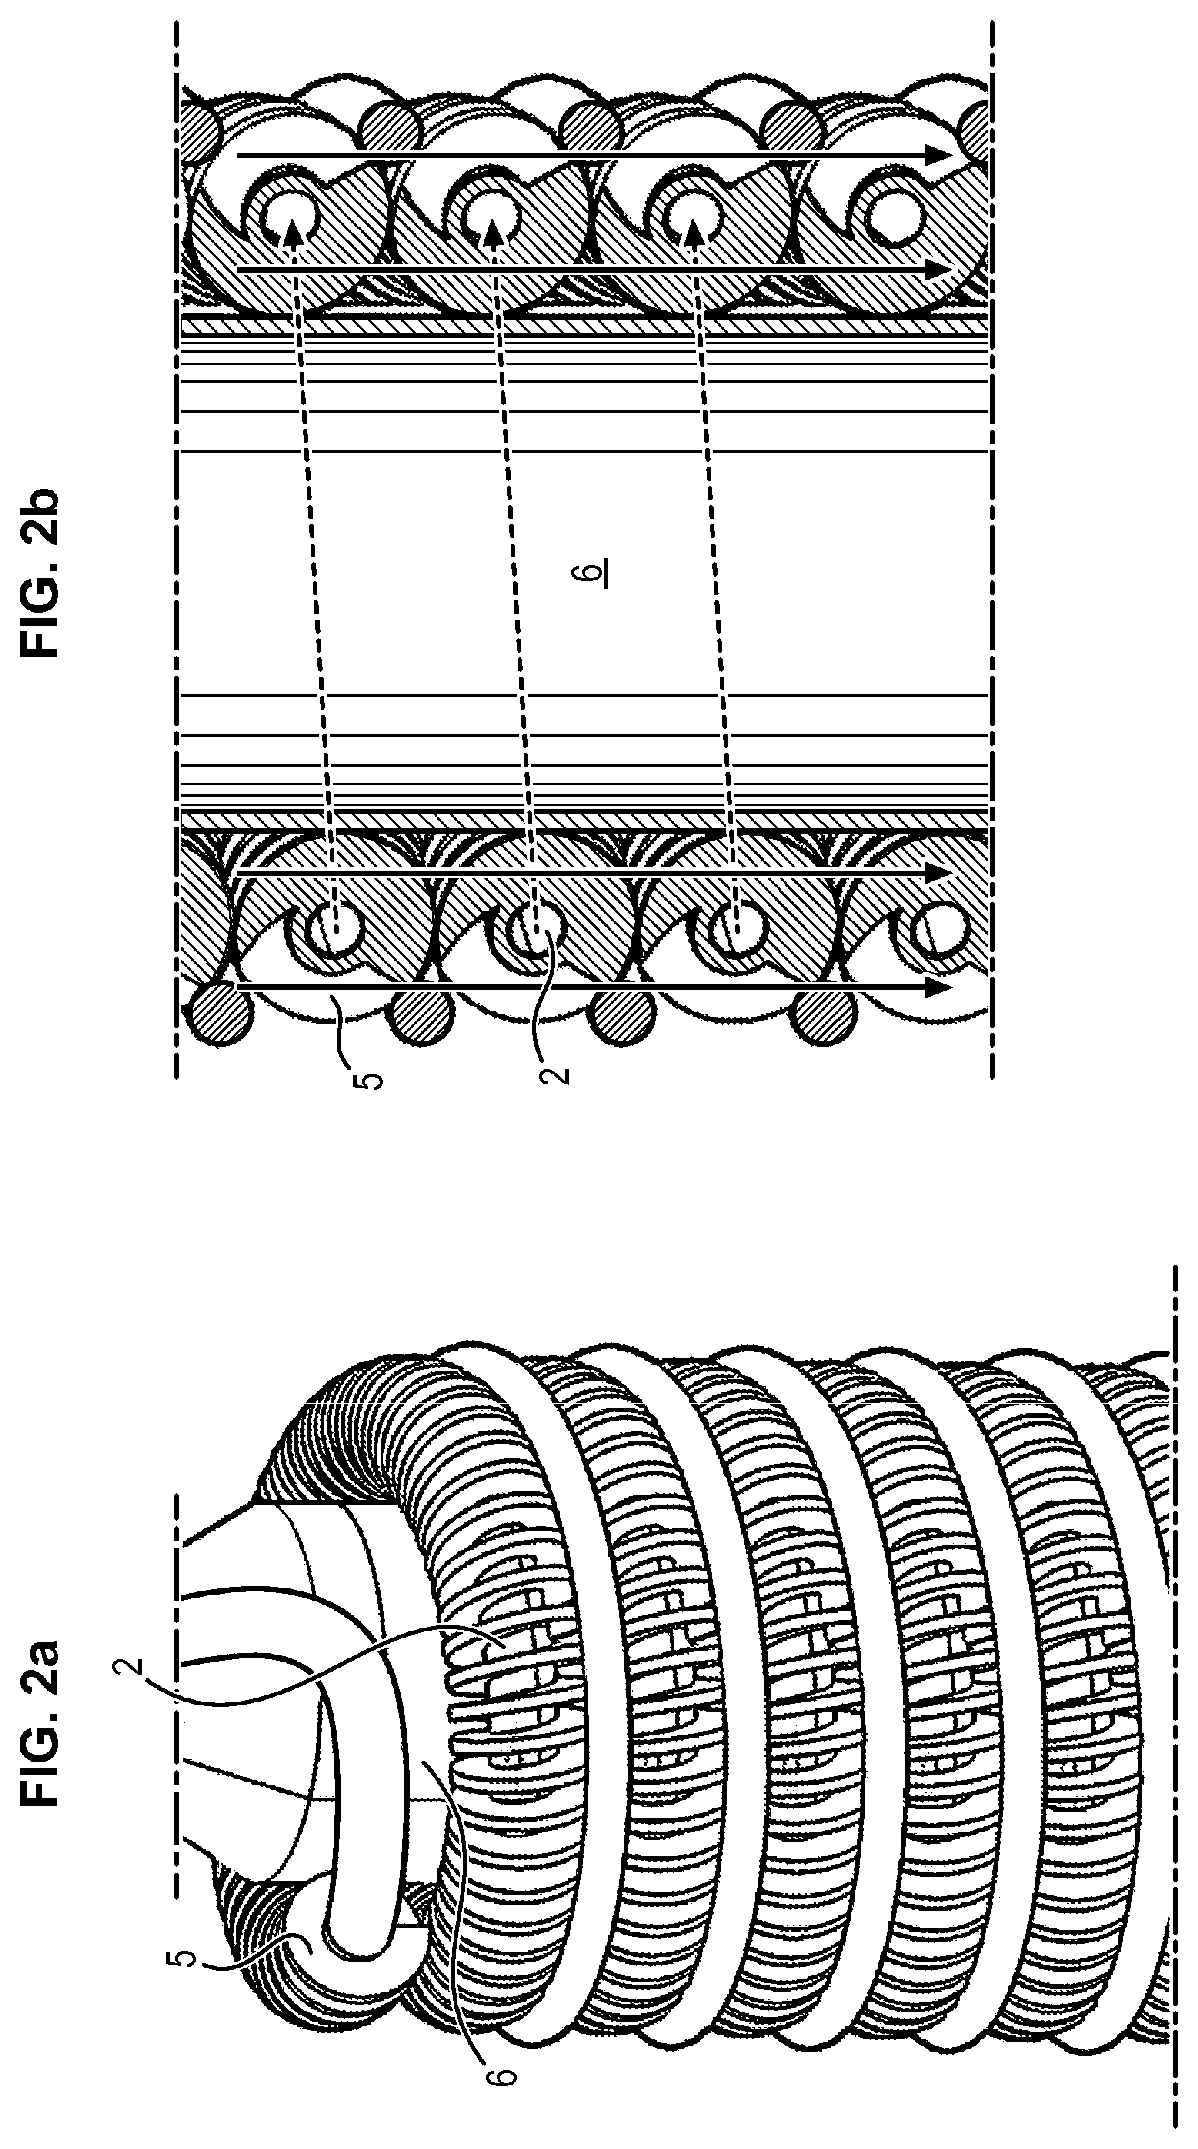 Part for Joule-Thomson cooler and method for manufacturing such a part